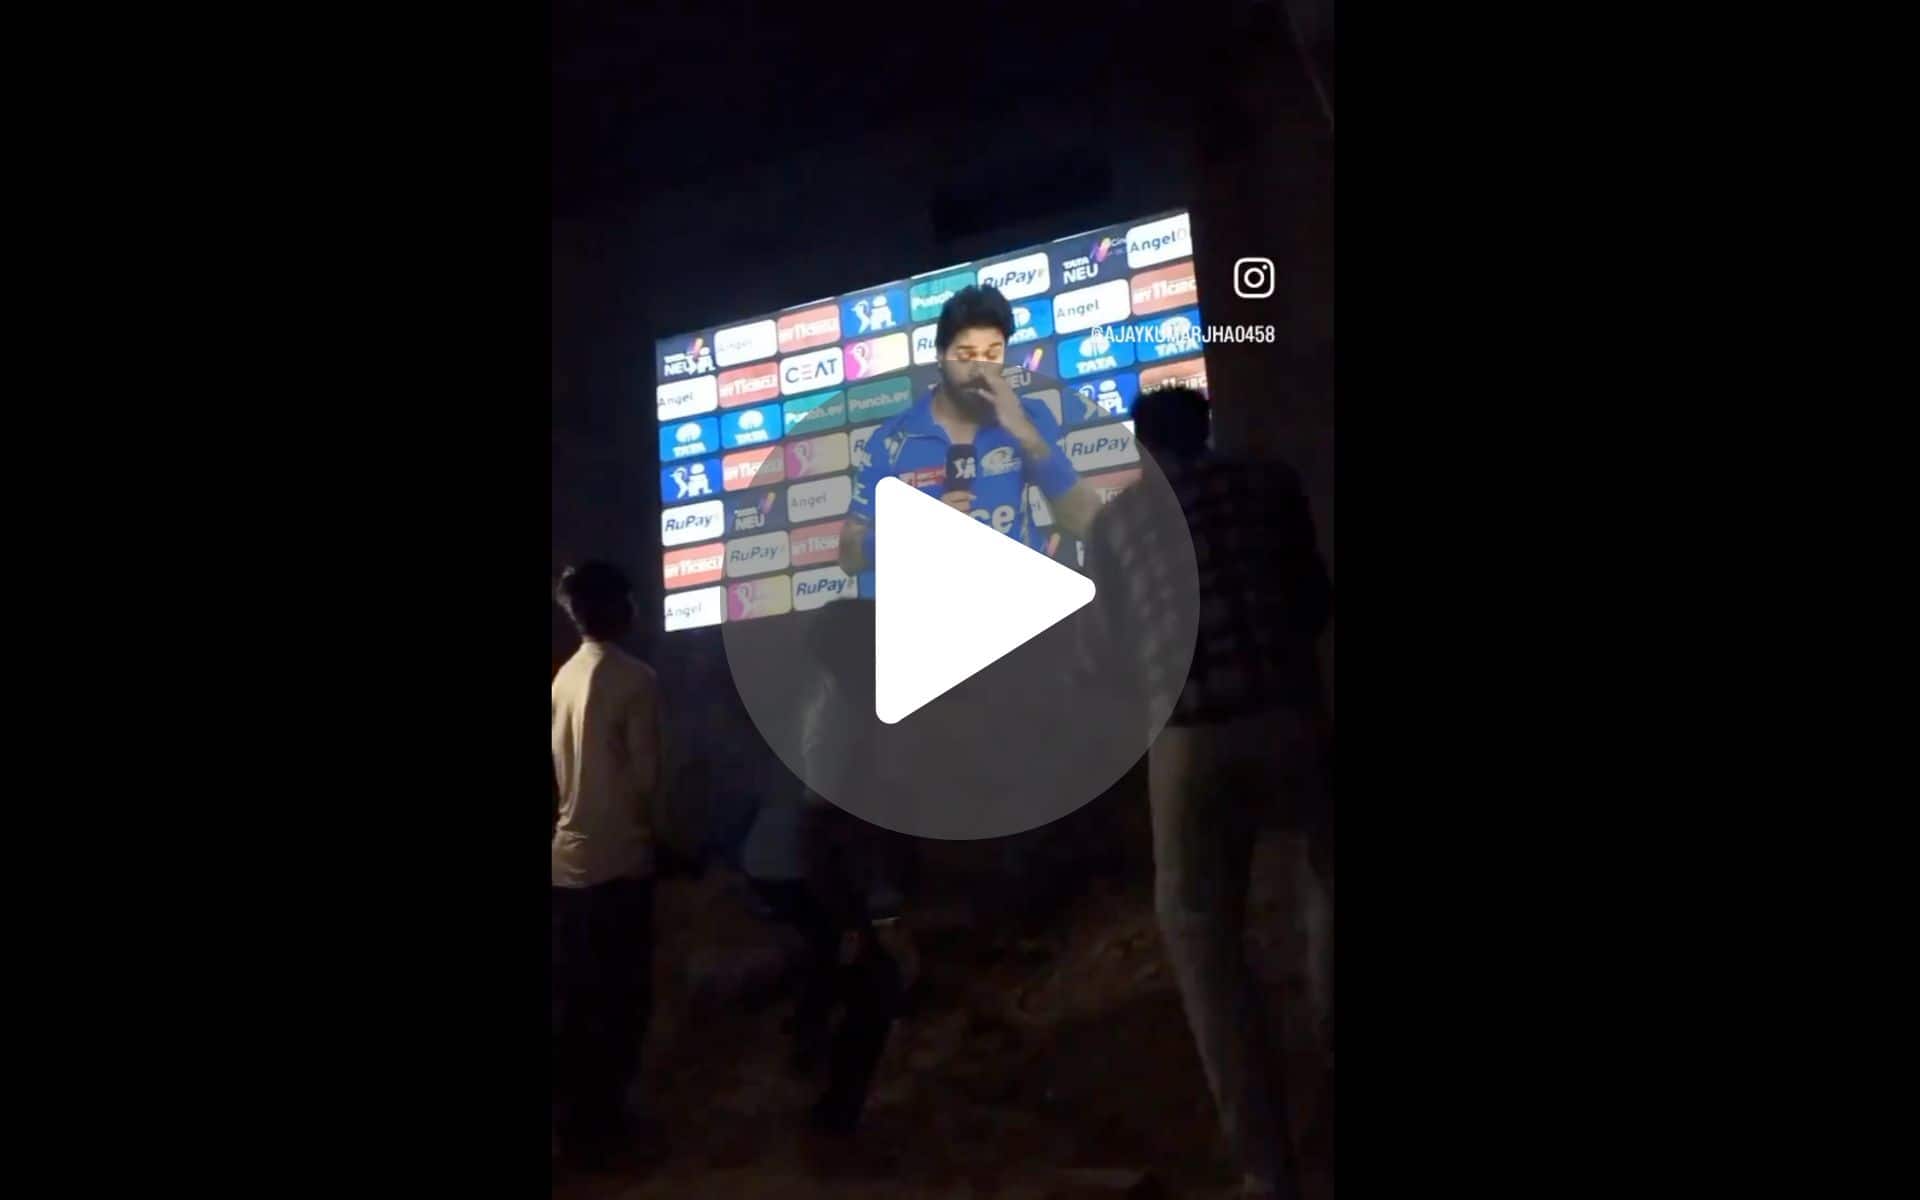 [Watch] Fans Throw Shoes & Stones At Screen As Hardik Pandya Comes For Interview